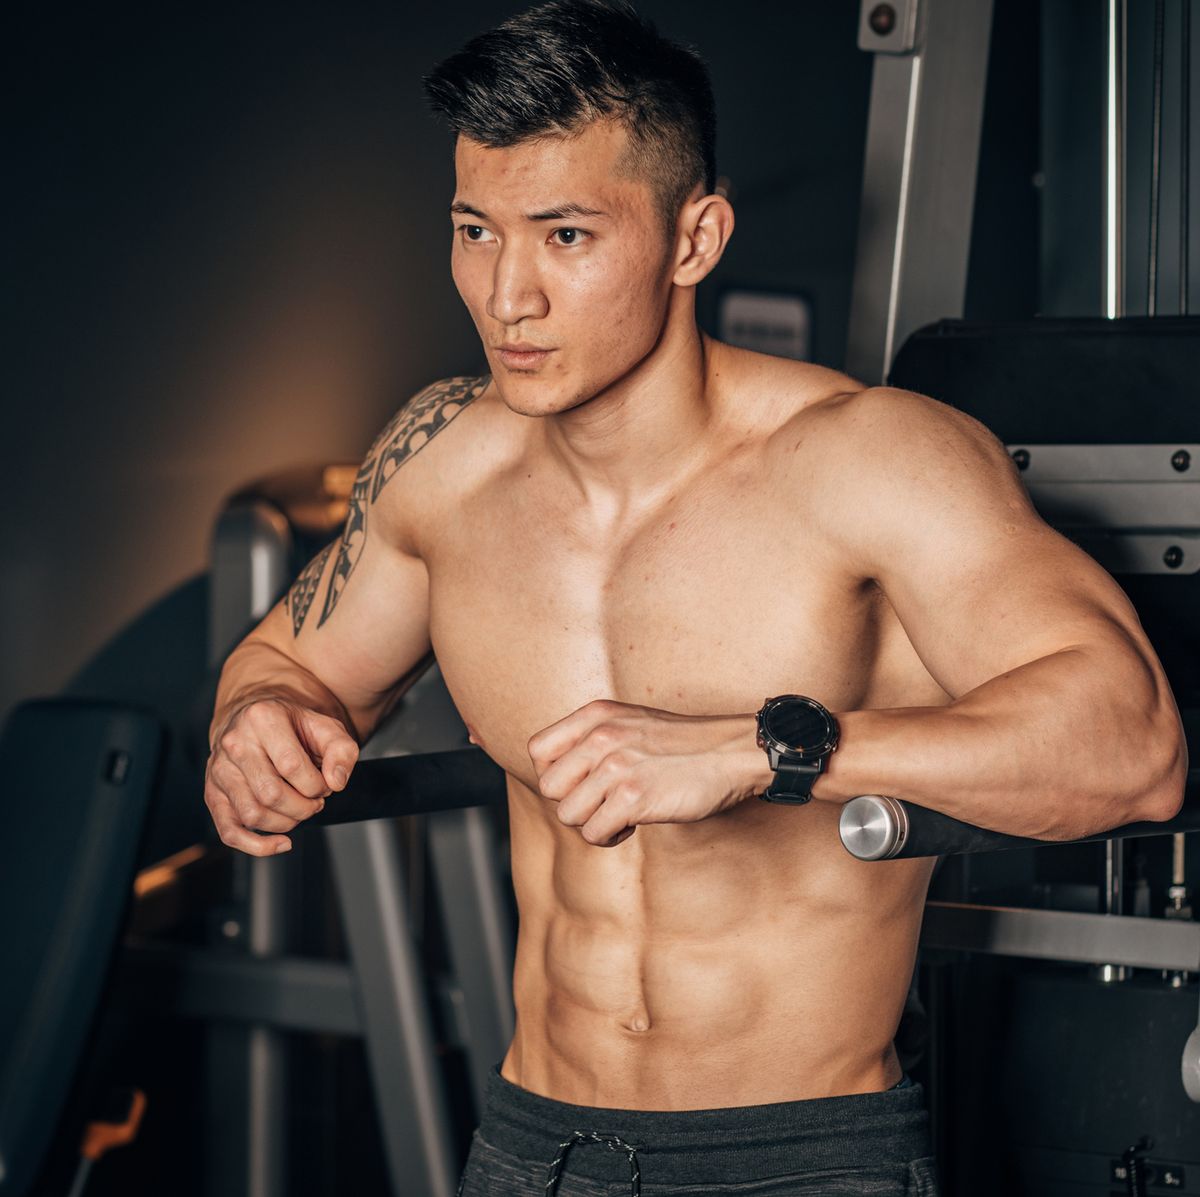 How Long Does It Take to Get Abs - Get a Muscular Six-Pack Core